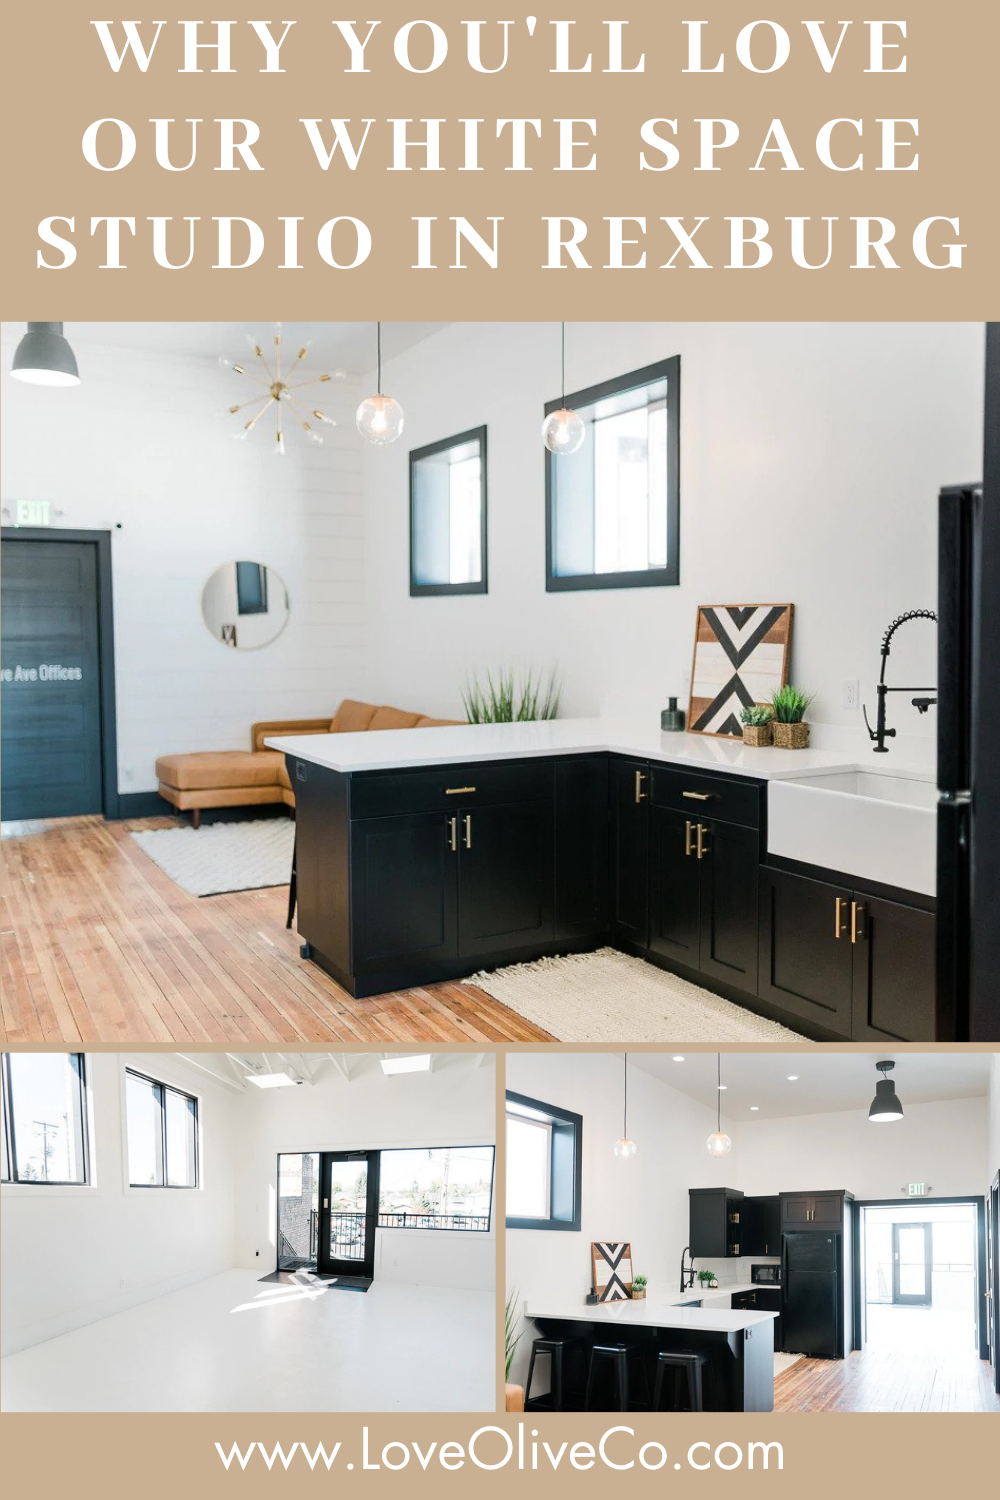 Why You'll Love Our White Studio Space in Rexburg www.loveoliveco.com